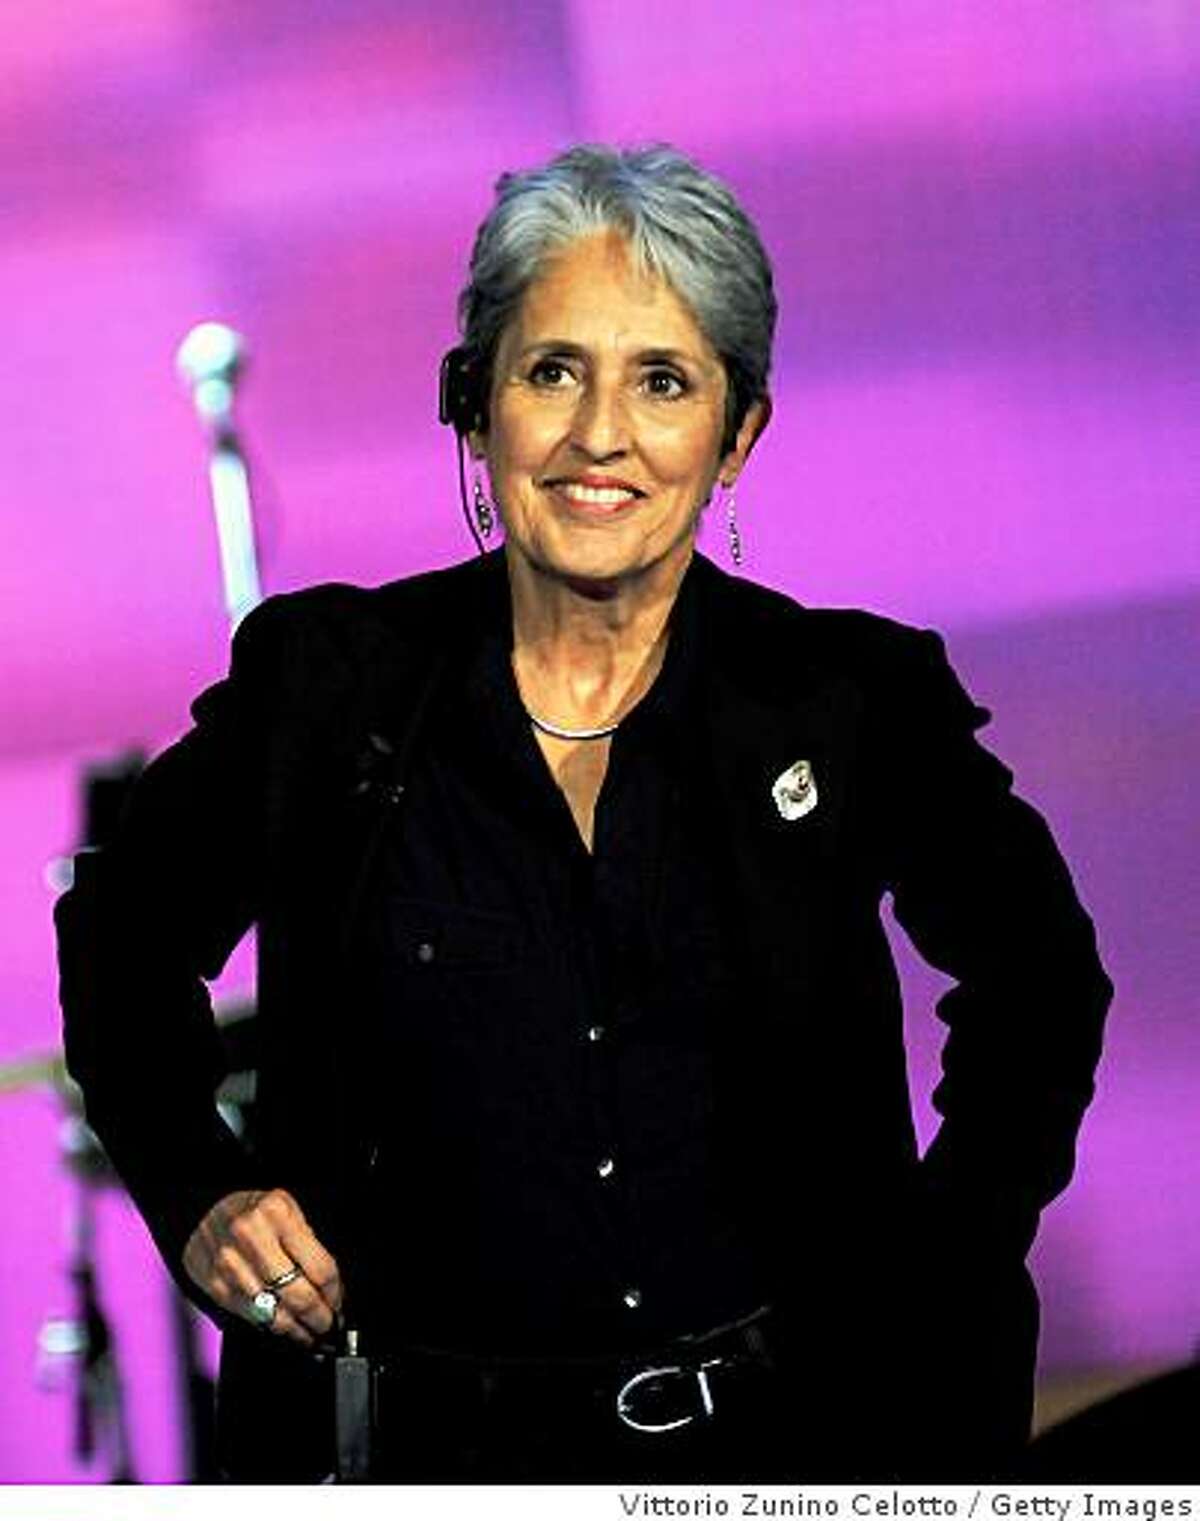 MILAN, ITALY - OCTOBER 11: Singer Joan Baez attends Che Tempo Che Fa Television Show held at RAI Studios on October 11, 2008 in Milan, Italy.